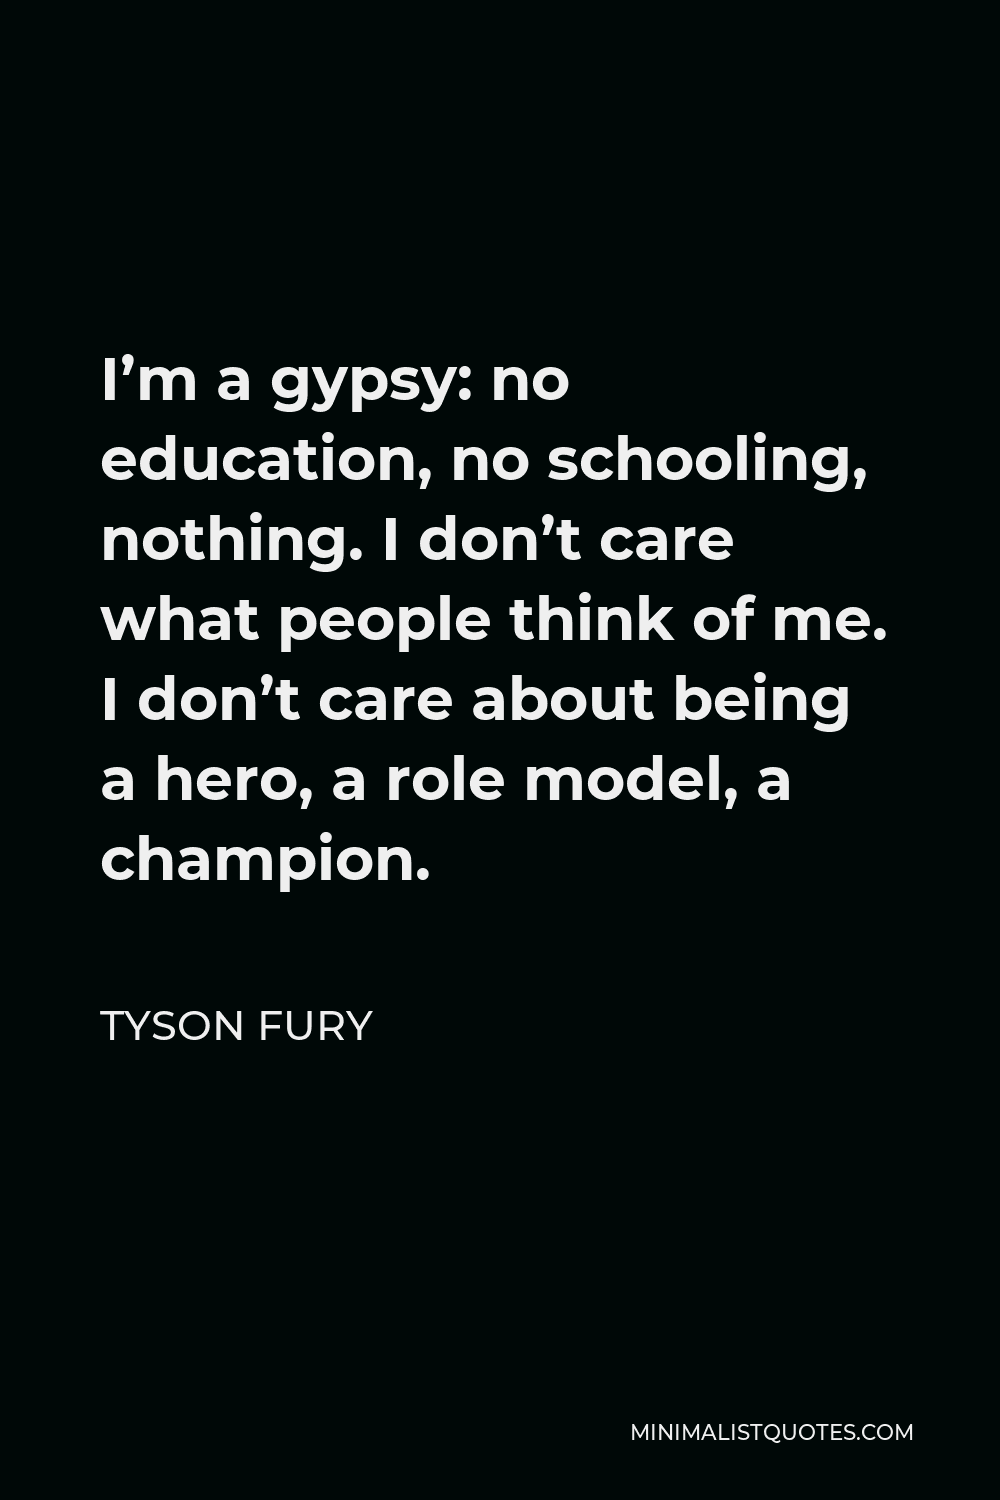 Tyson Fury Quote - I’m a gypsy: no education, no schooling, nothing. I don’t care what people think of me. I don’t care about being a hero, a role model, a champion.